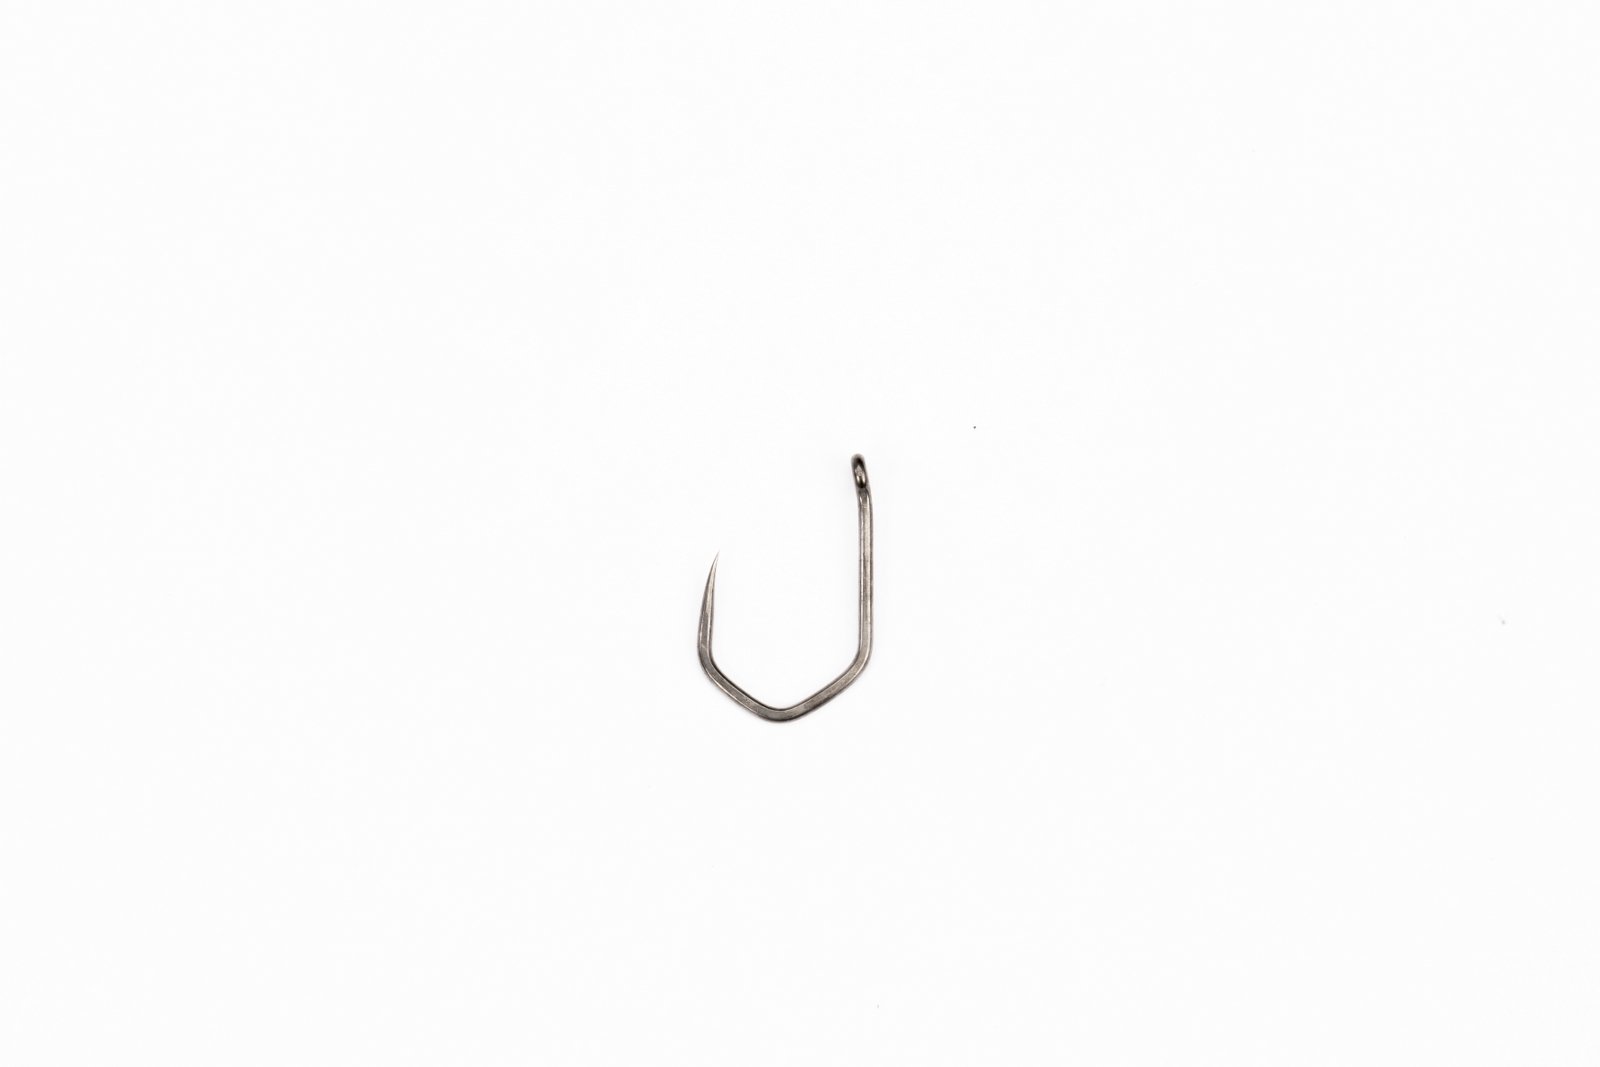 Nash Claw Size 10 Barbless Hooks & Sharpening Tackle T6179 International Shop Europe